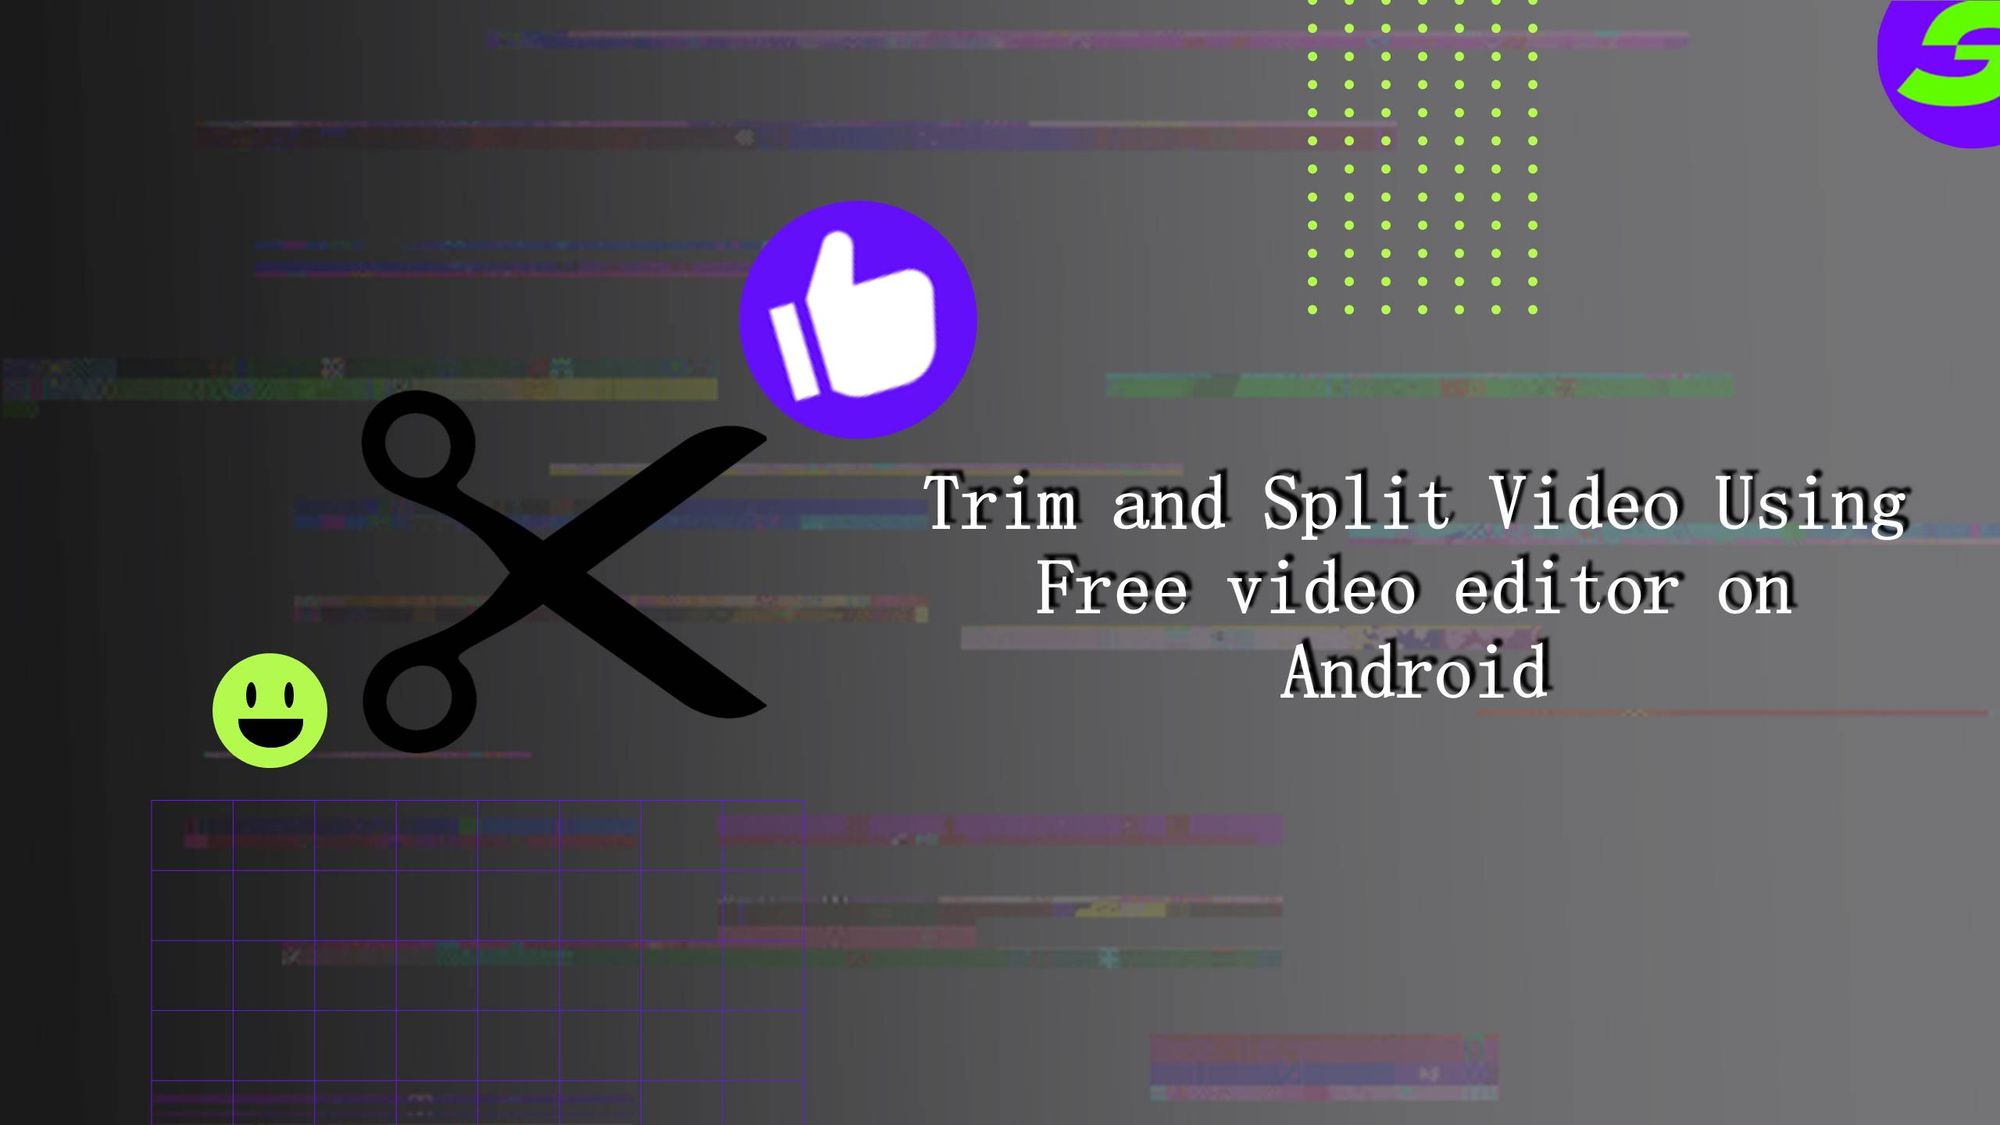 Trim and Split video with Ease. Try ShotCut's free video editor now!